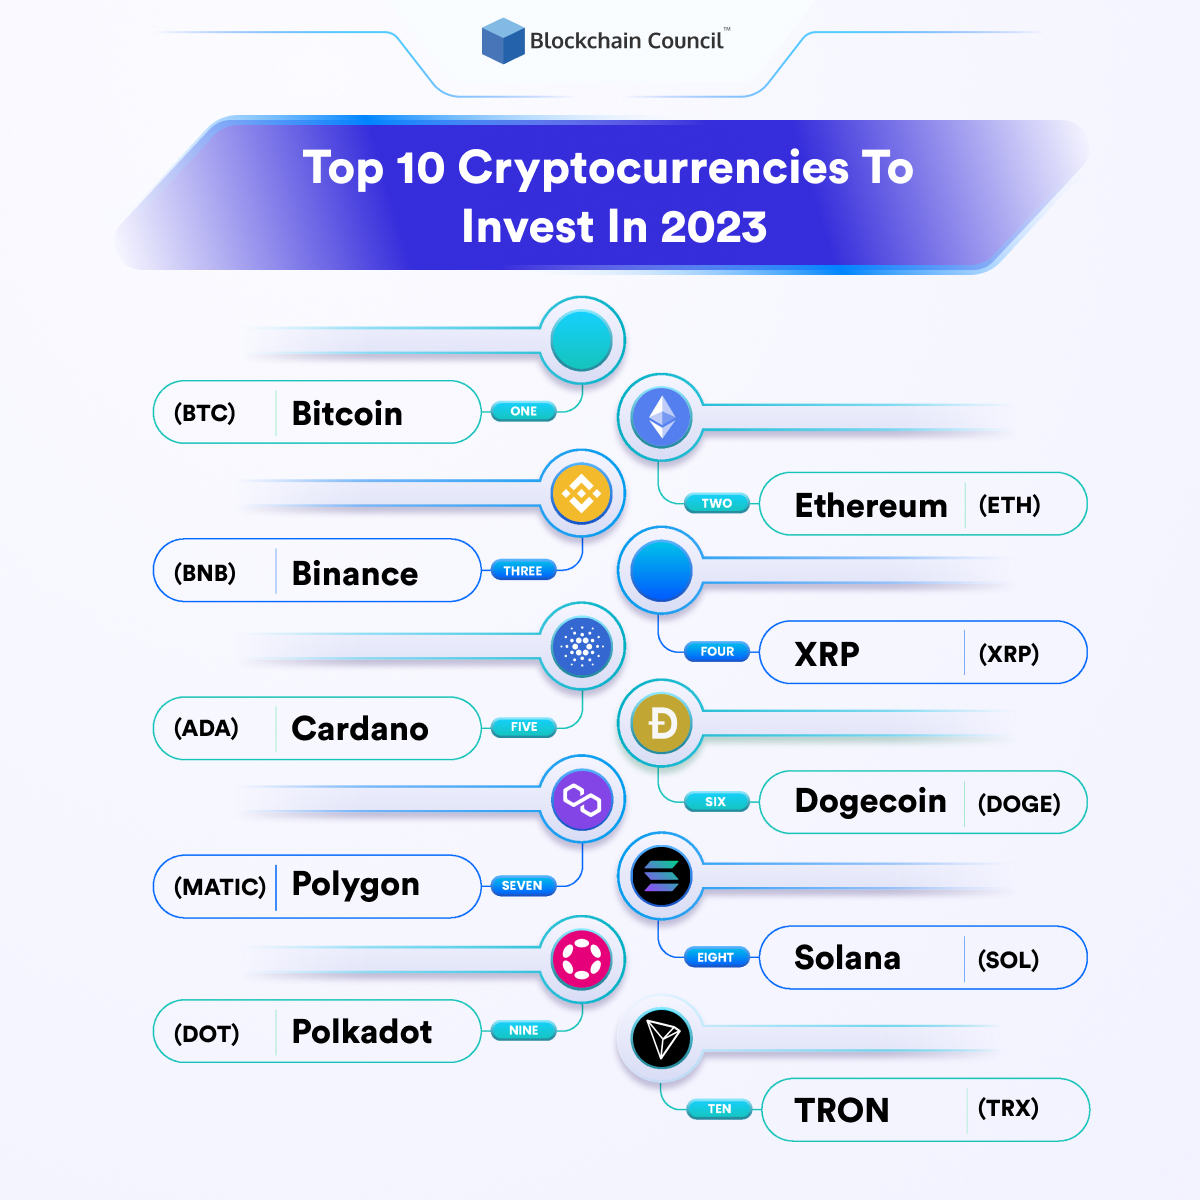 Top 10 Cryptocurrencies To Invest In 2023 